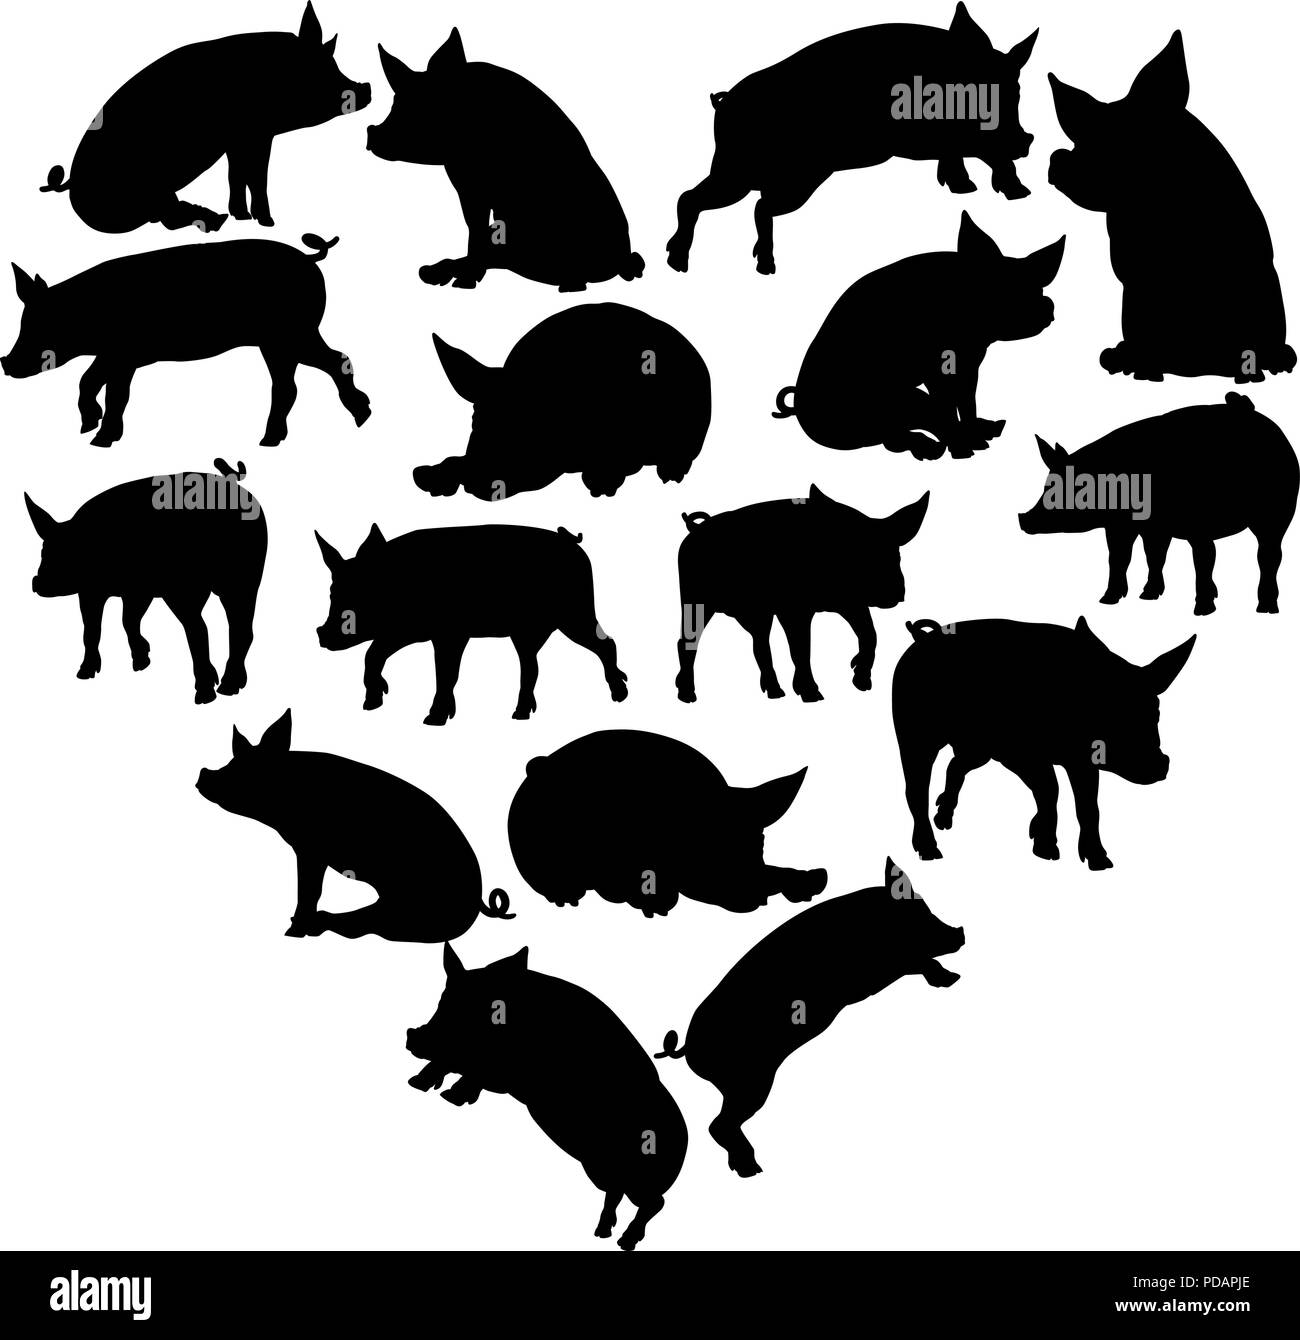 Pig Heart Silhouette Concept Stock Vector